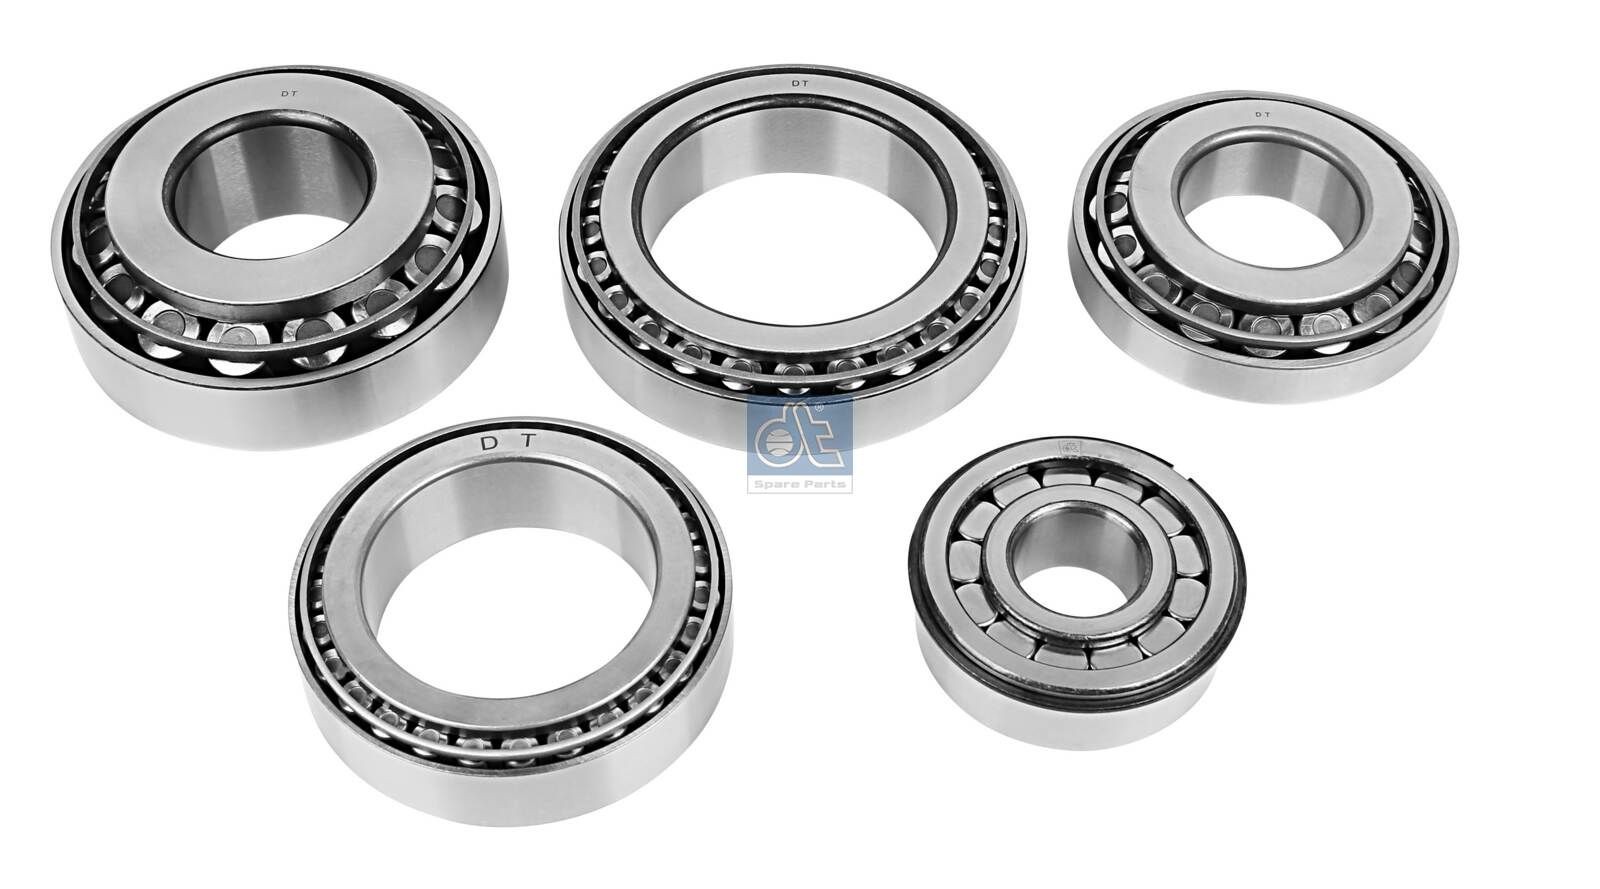 DT Spare Parts 1.31630 Wheel bearing kit